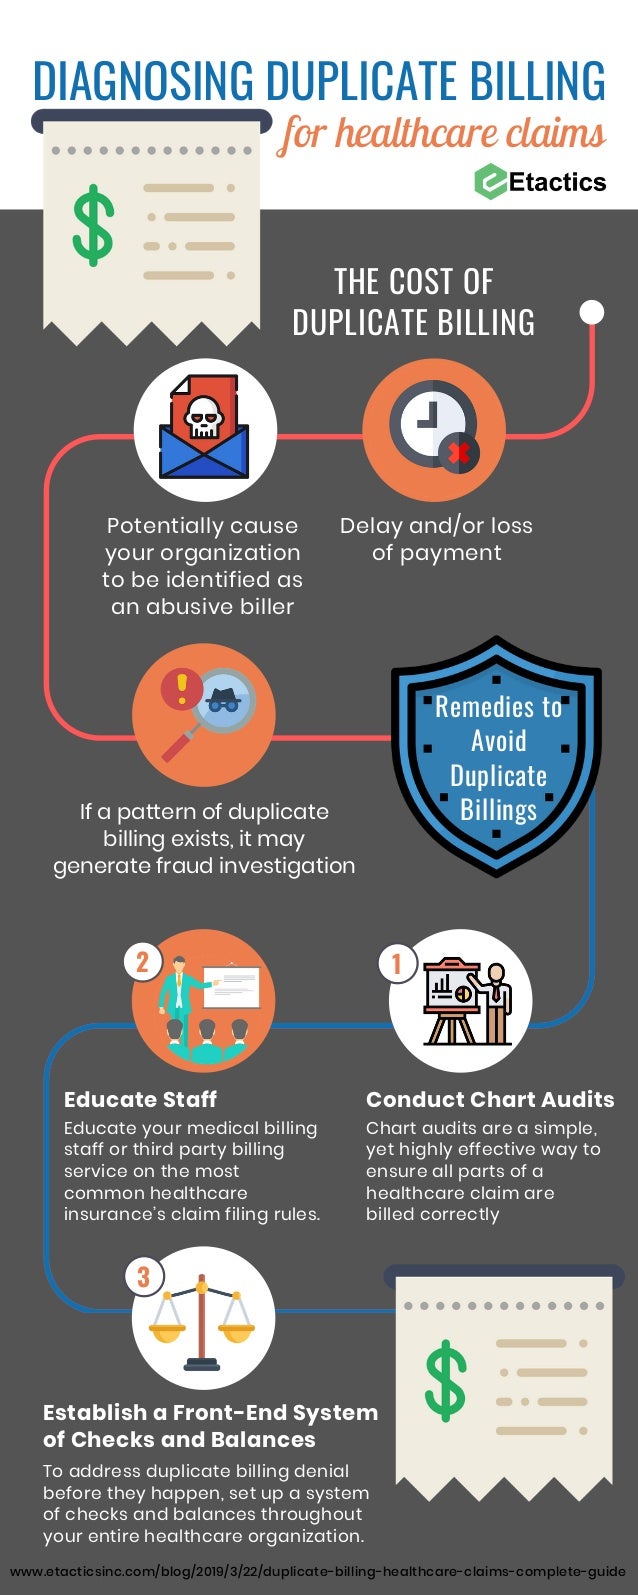 Chart Audits In Healthcare